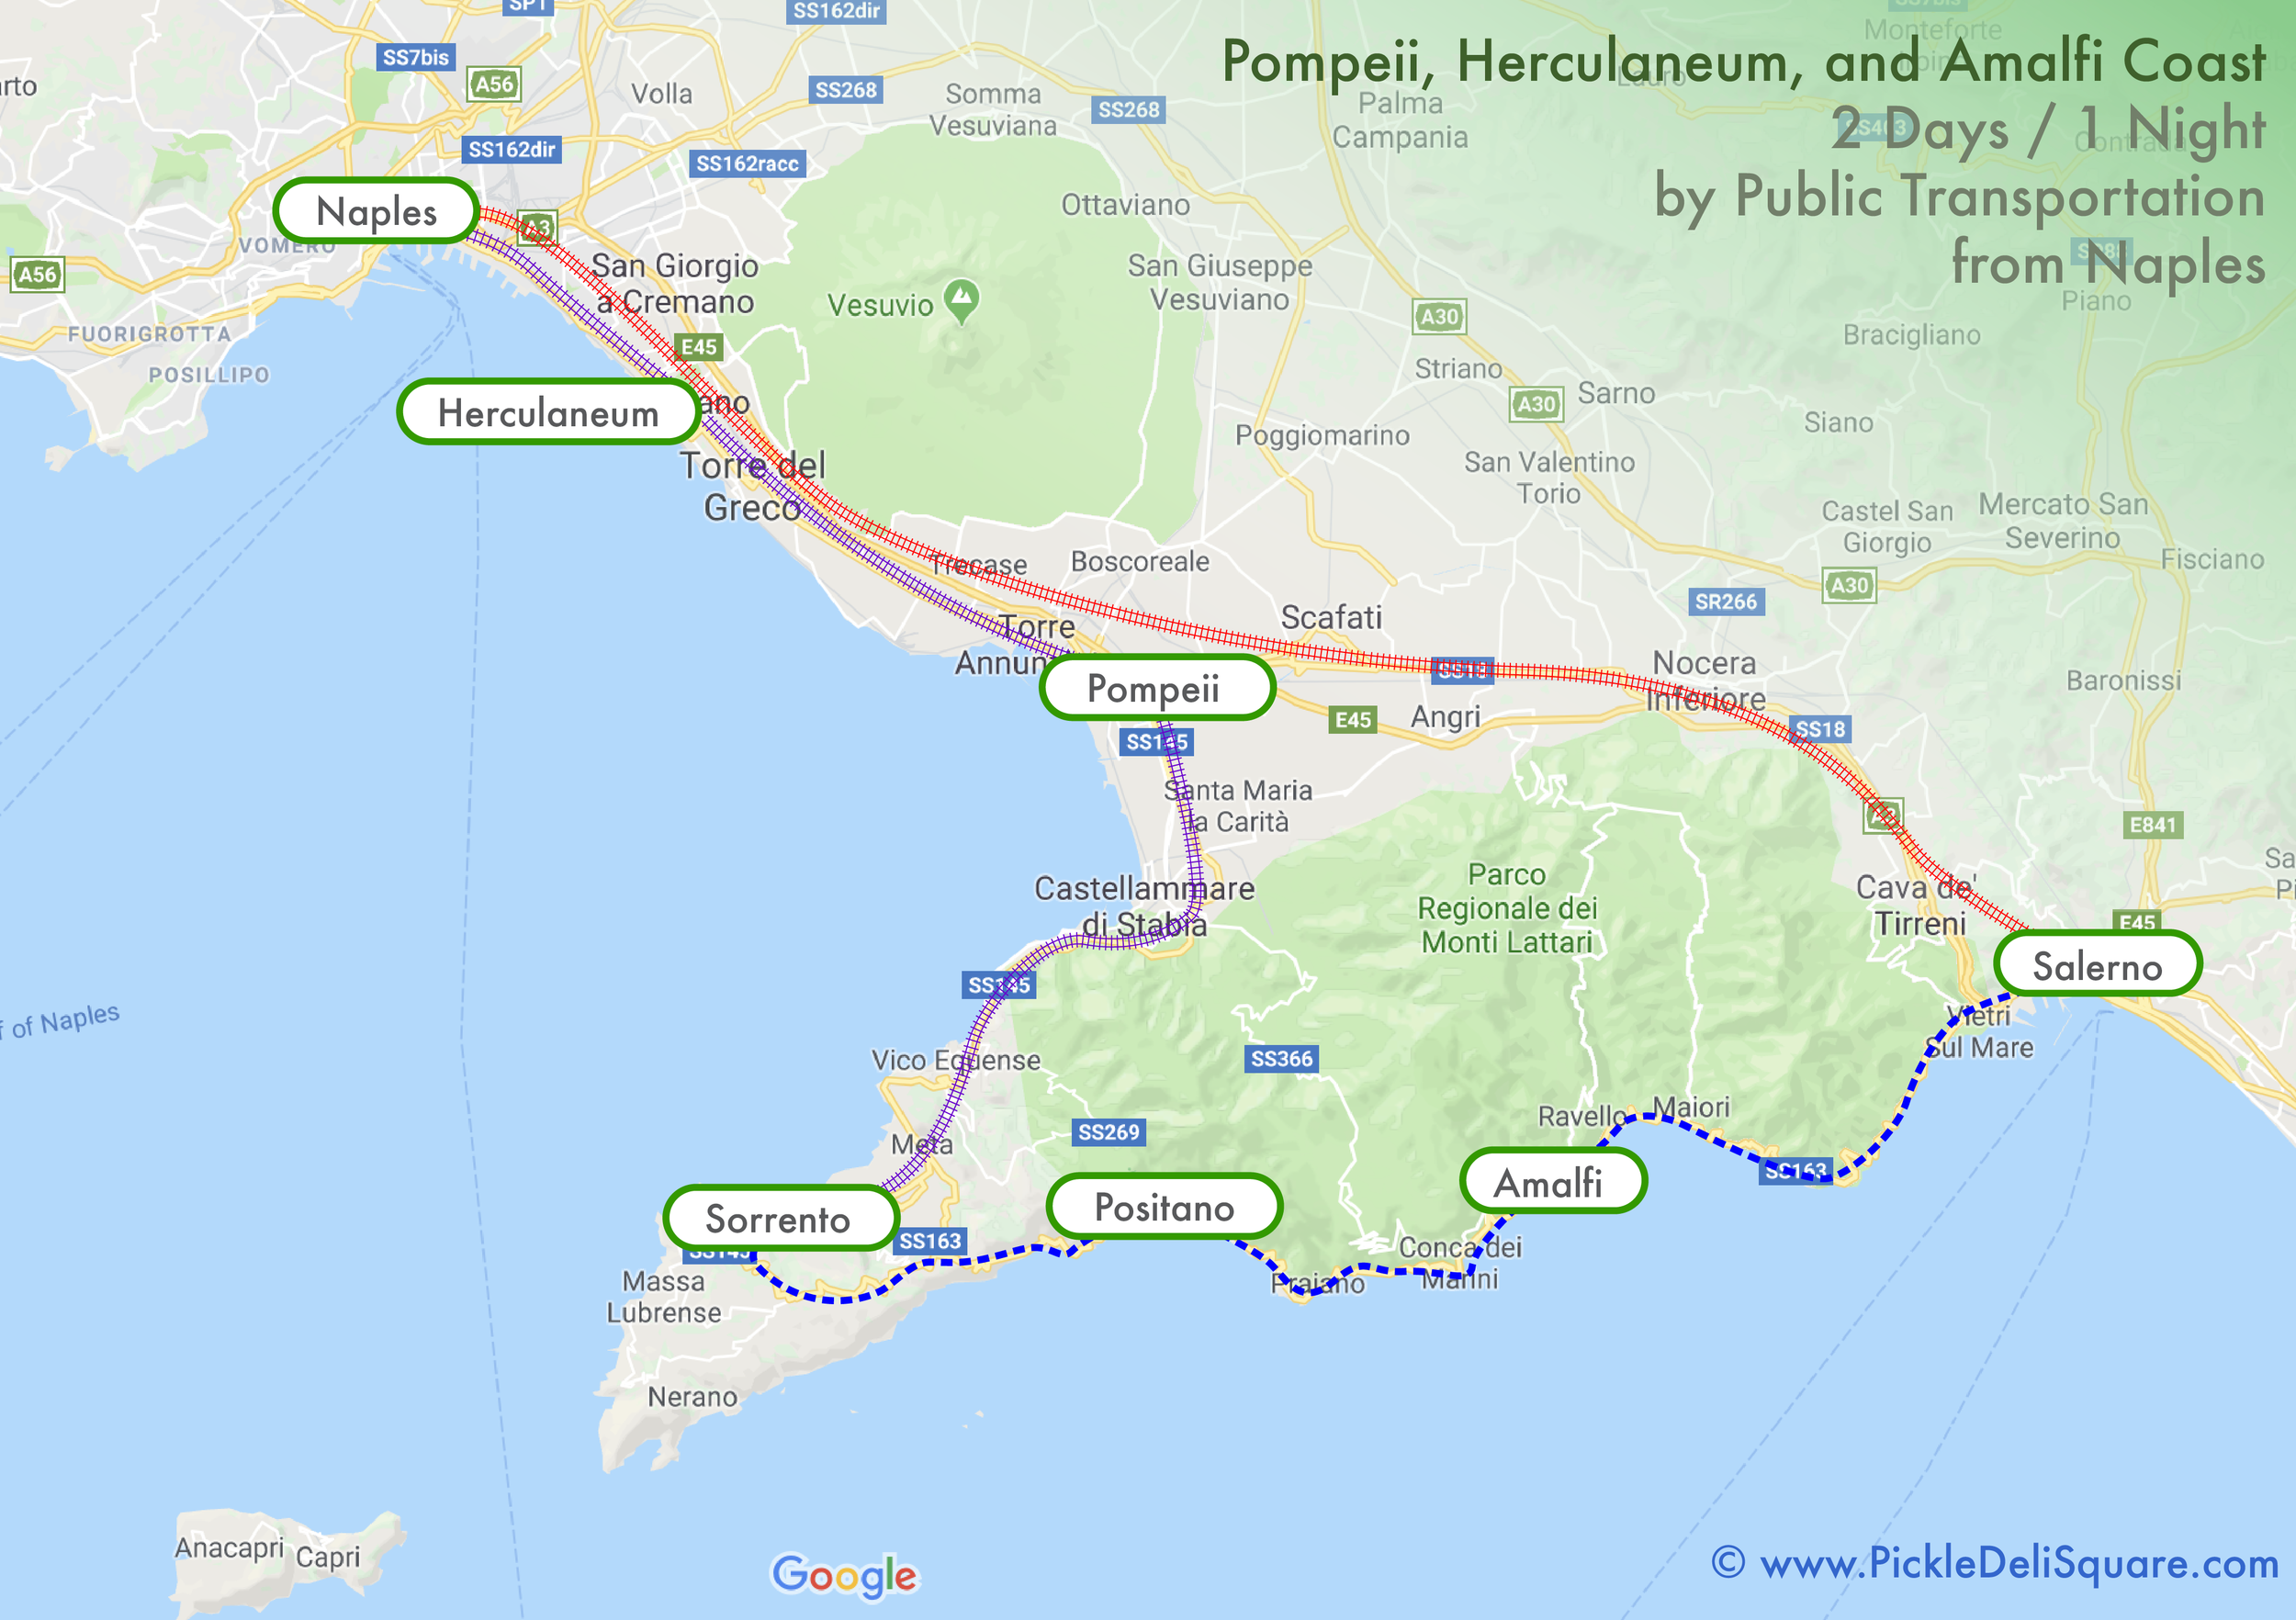 DIY Pompeii Coast: 2 day / 1 night itinerary by public transportation and no — Pickle Deli Square